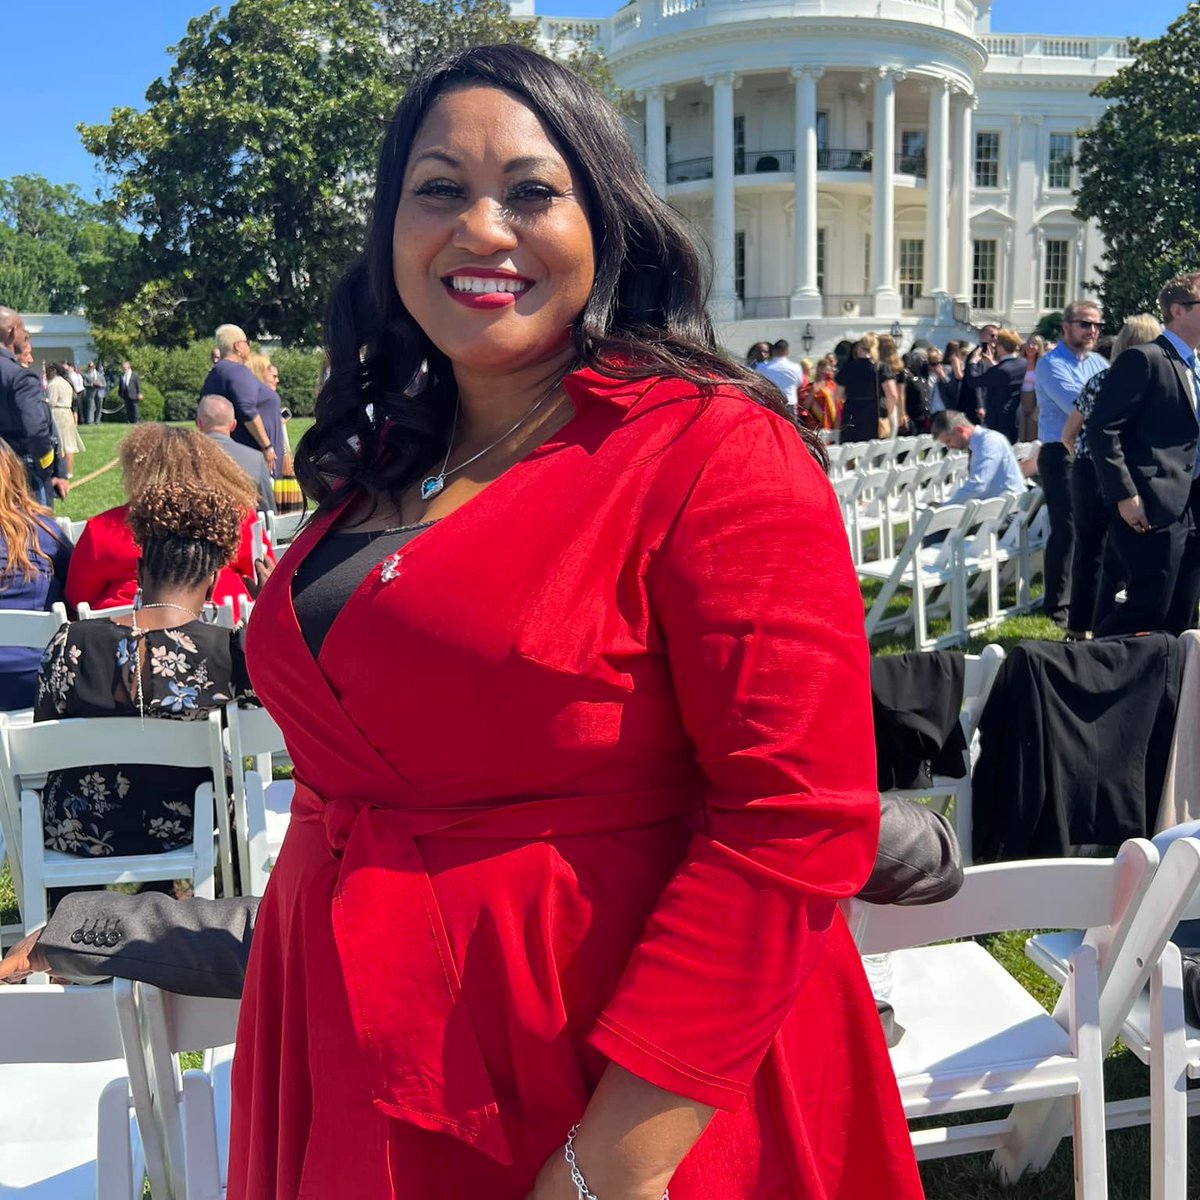 From the cemetery to the White House, I arose a Champion for Gun Safety to End Gun Violence and to heal the hurting by empowering survivors to find their voice to join me on the frontlines to fight for change. I Did IT George, Thank you!#Bipartisan #Gunsafety #conversationsmatter